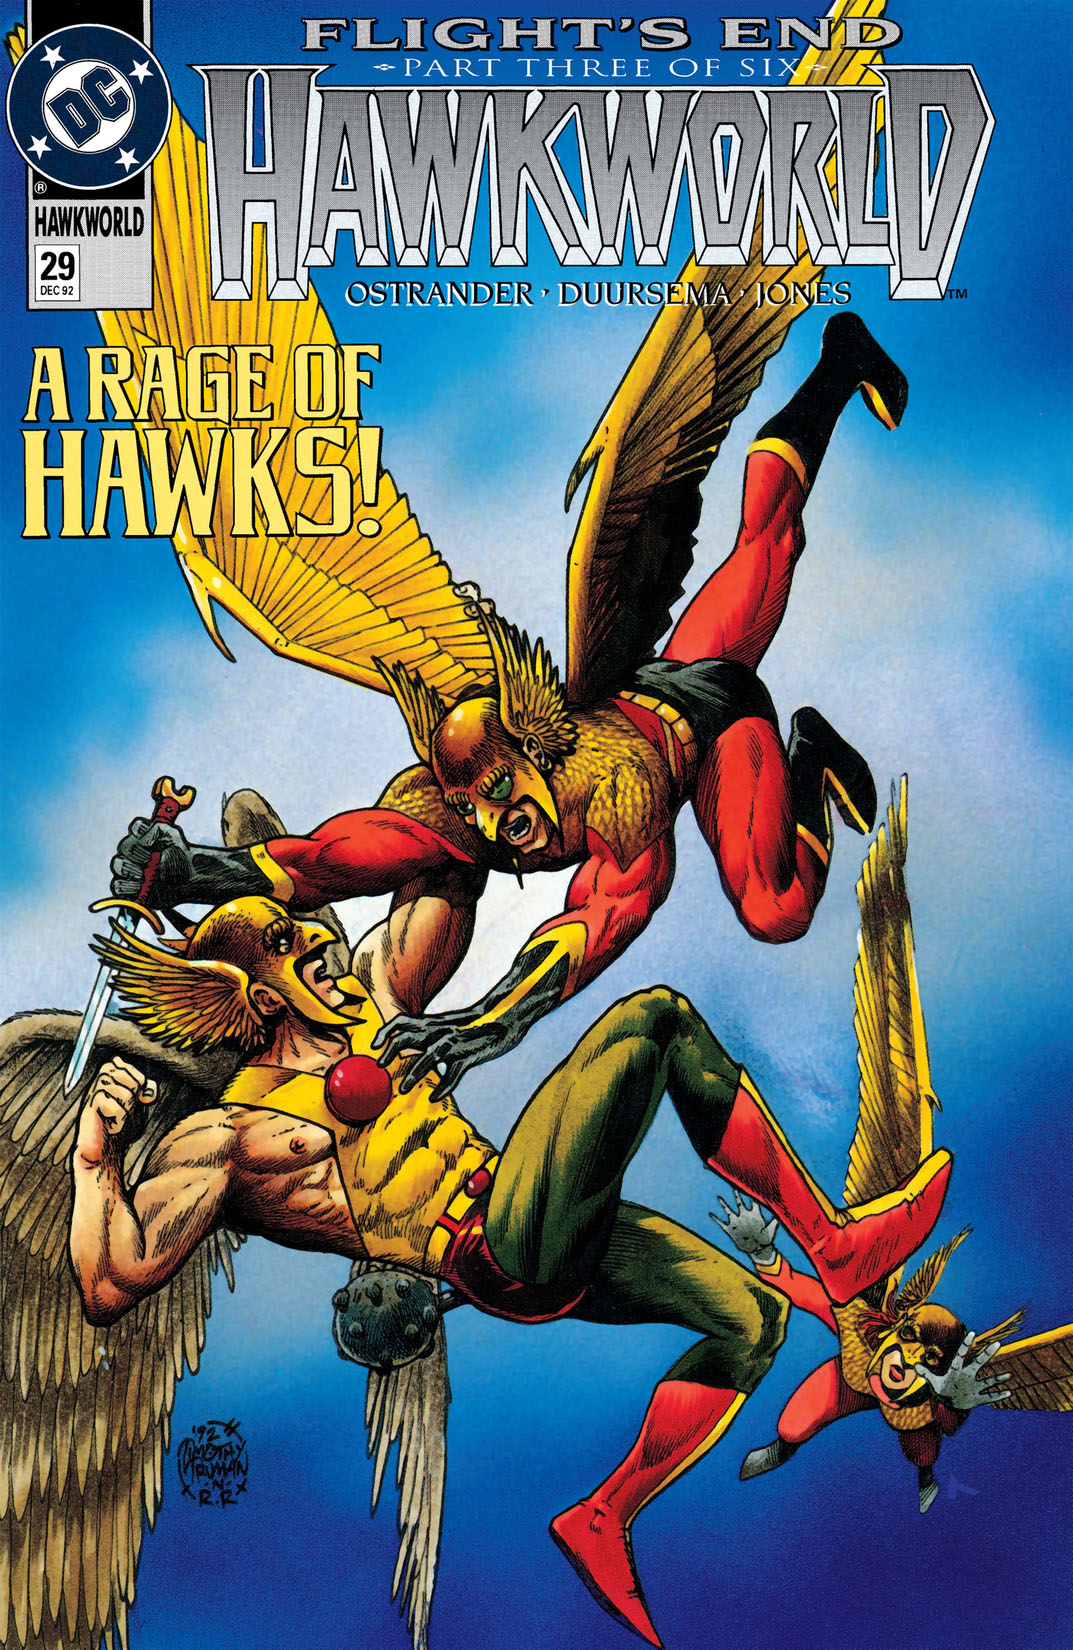 Hawkworld (1989-) #29 preview images